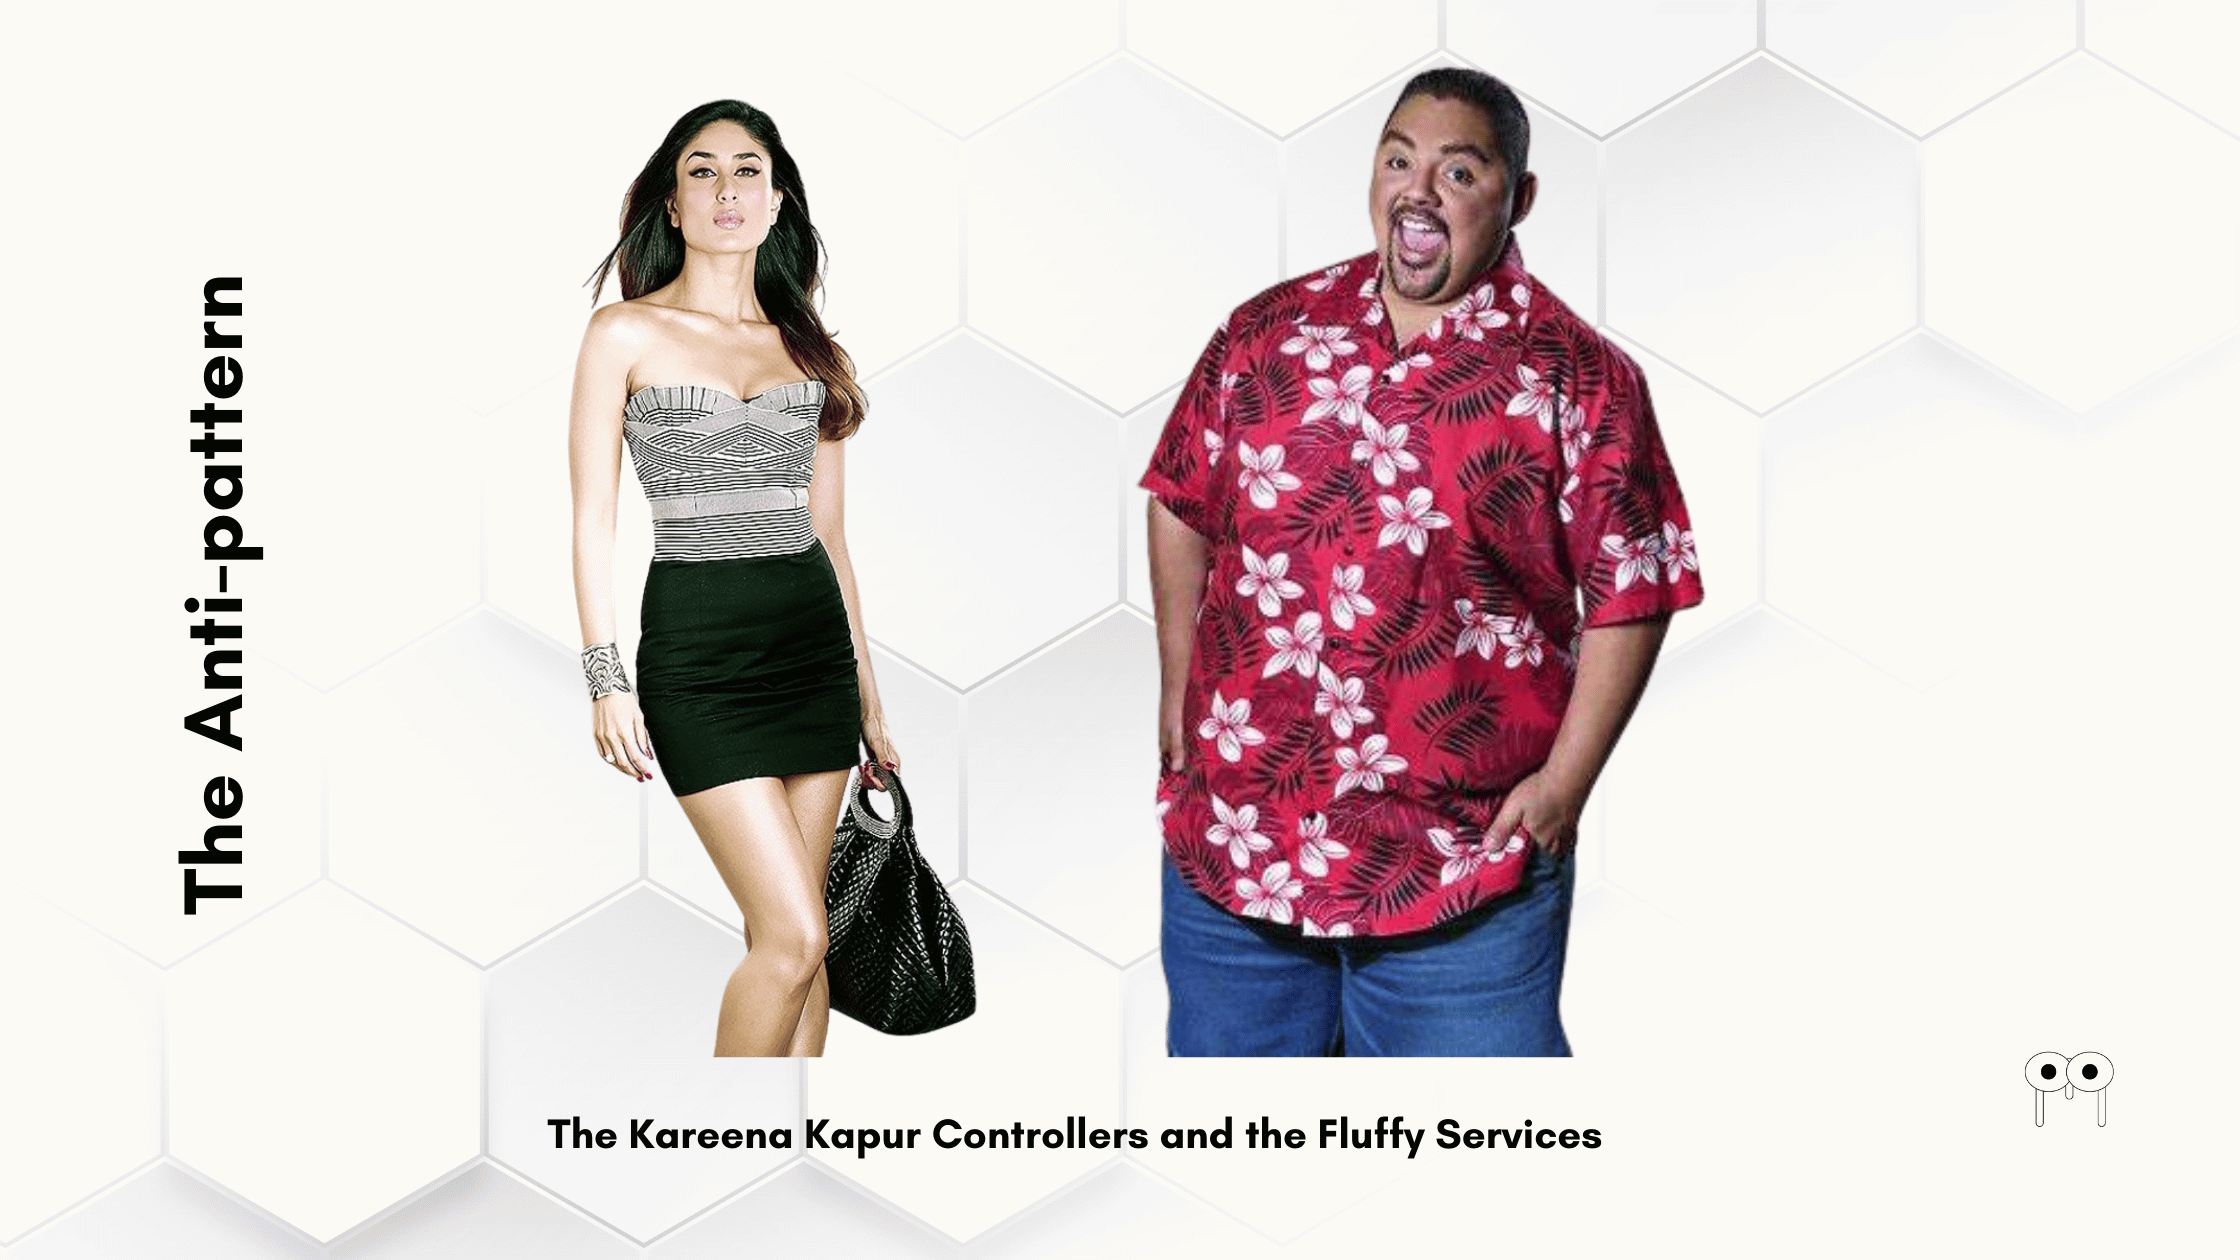 Kareena Kapoor Controllers and the Fluffy Services